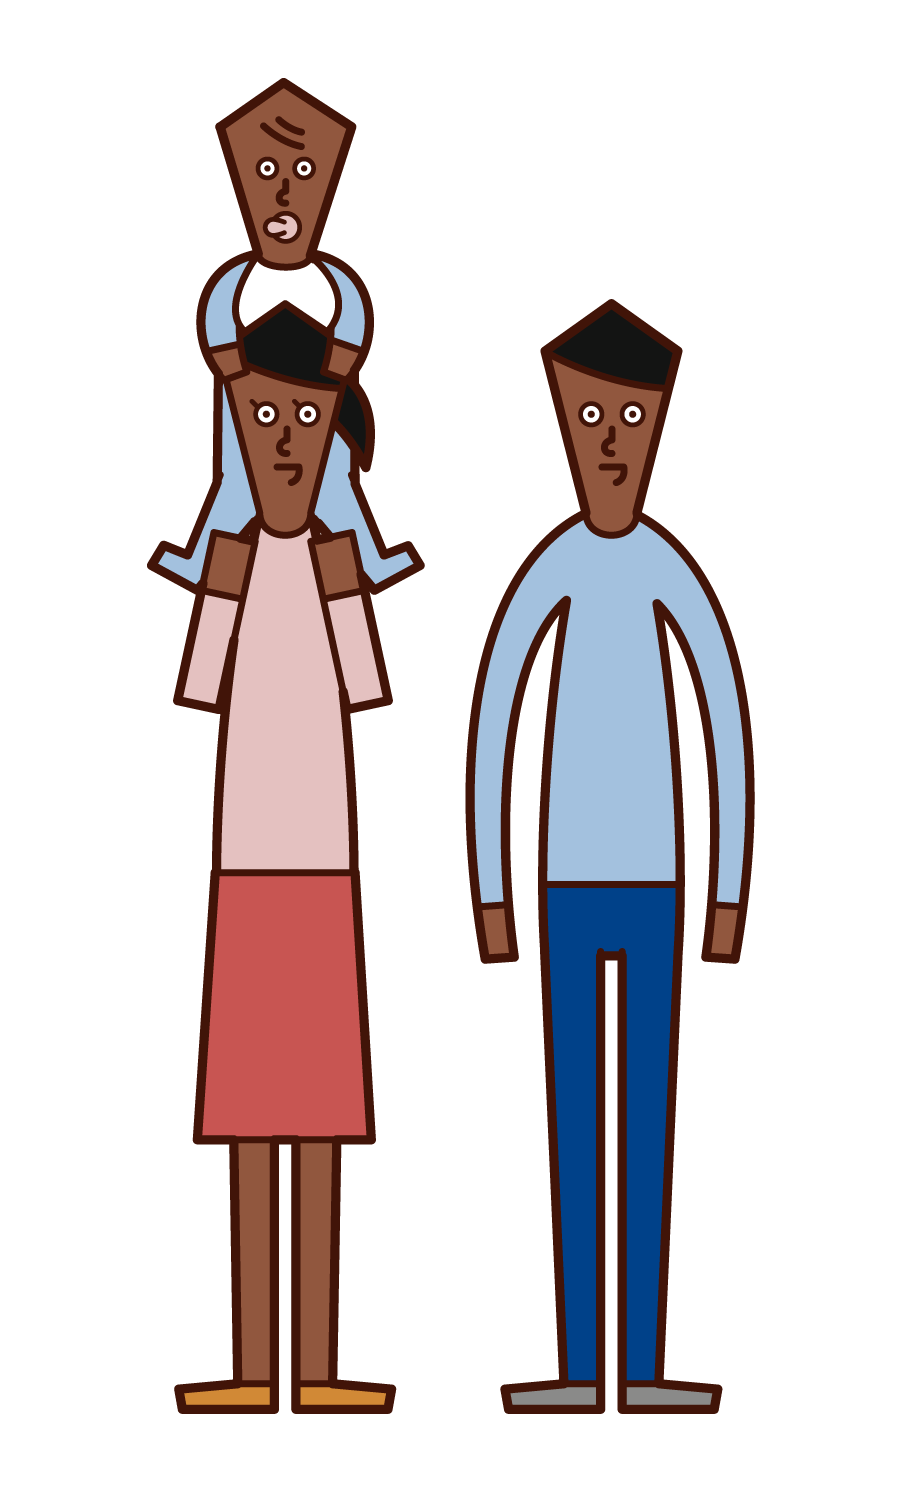 Illustration of a couple shouldering a child